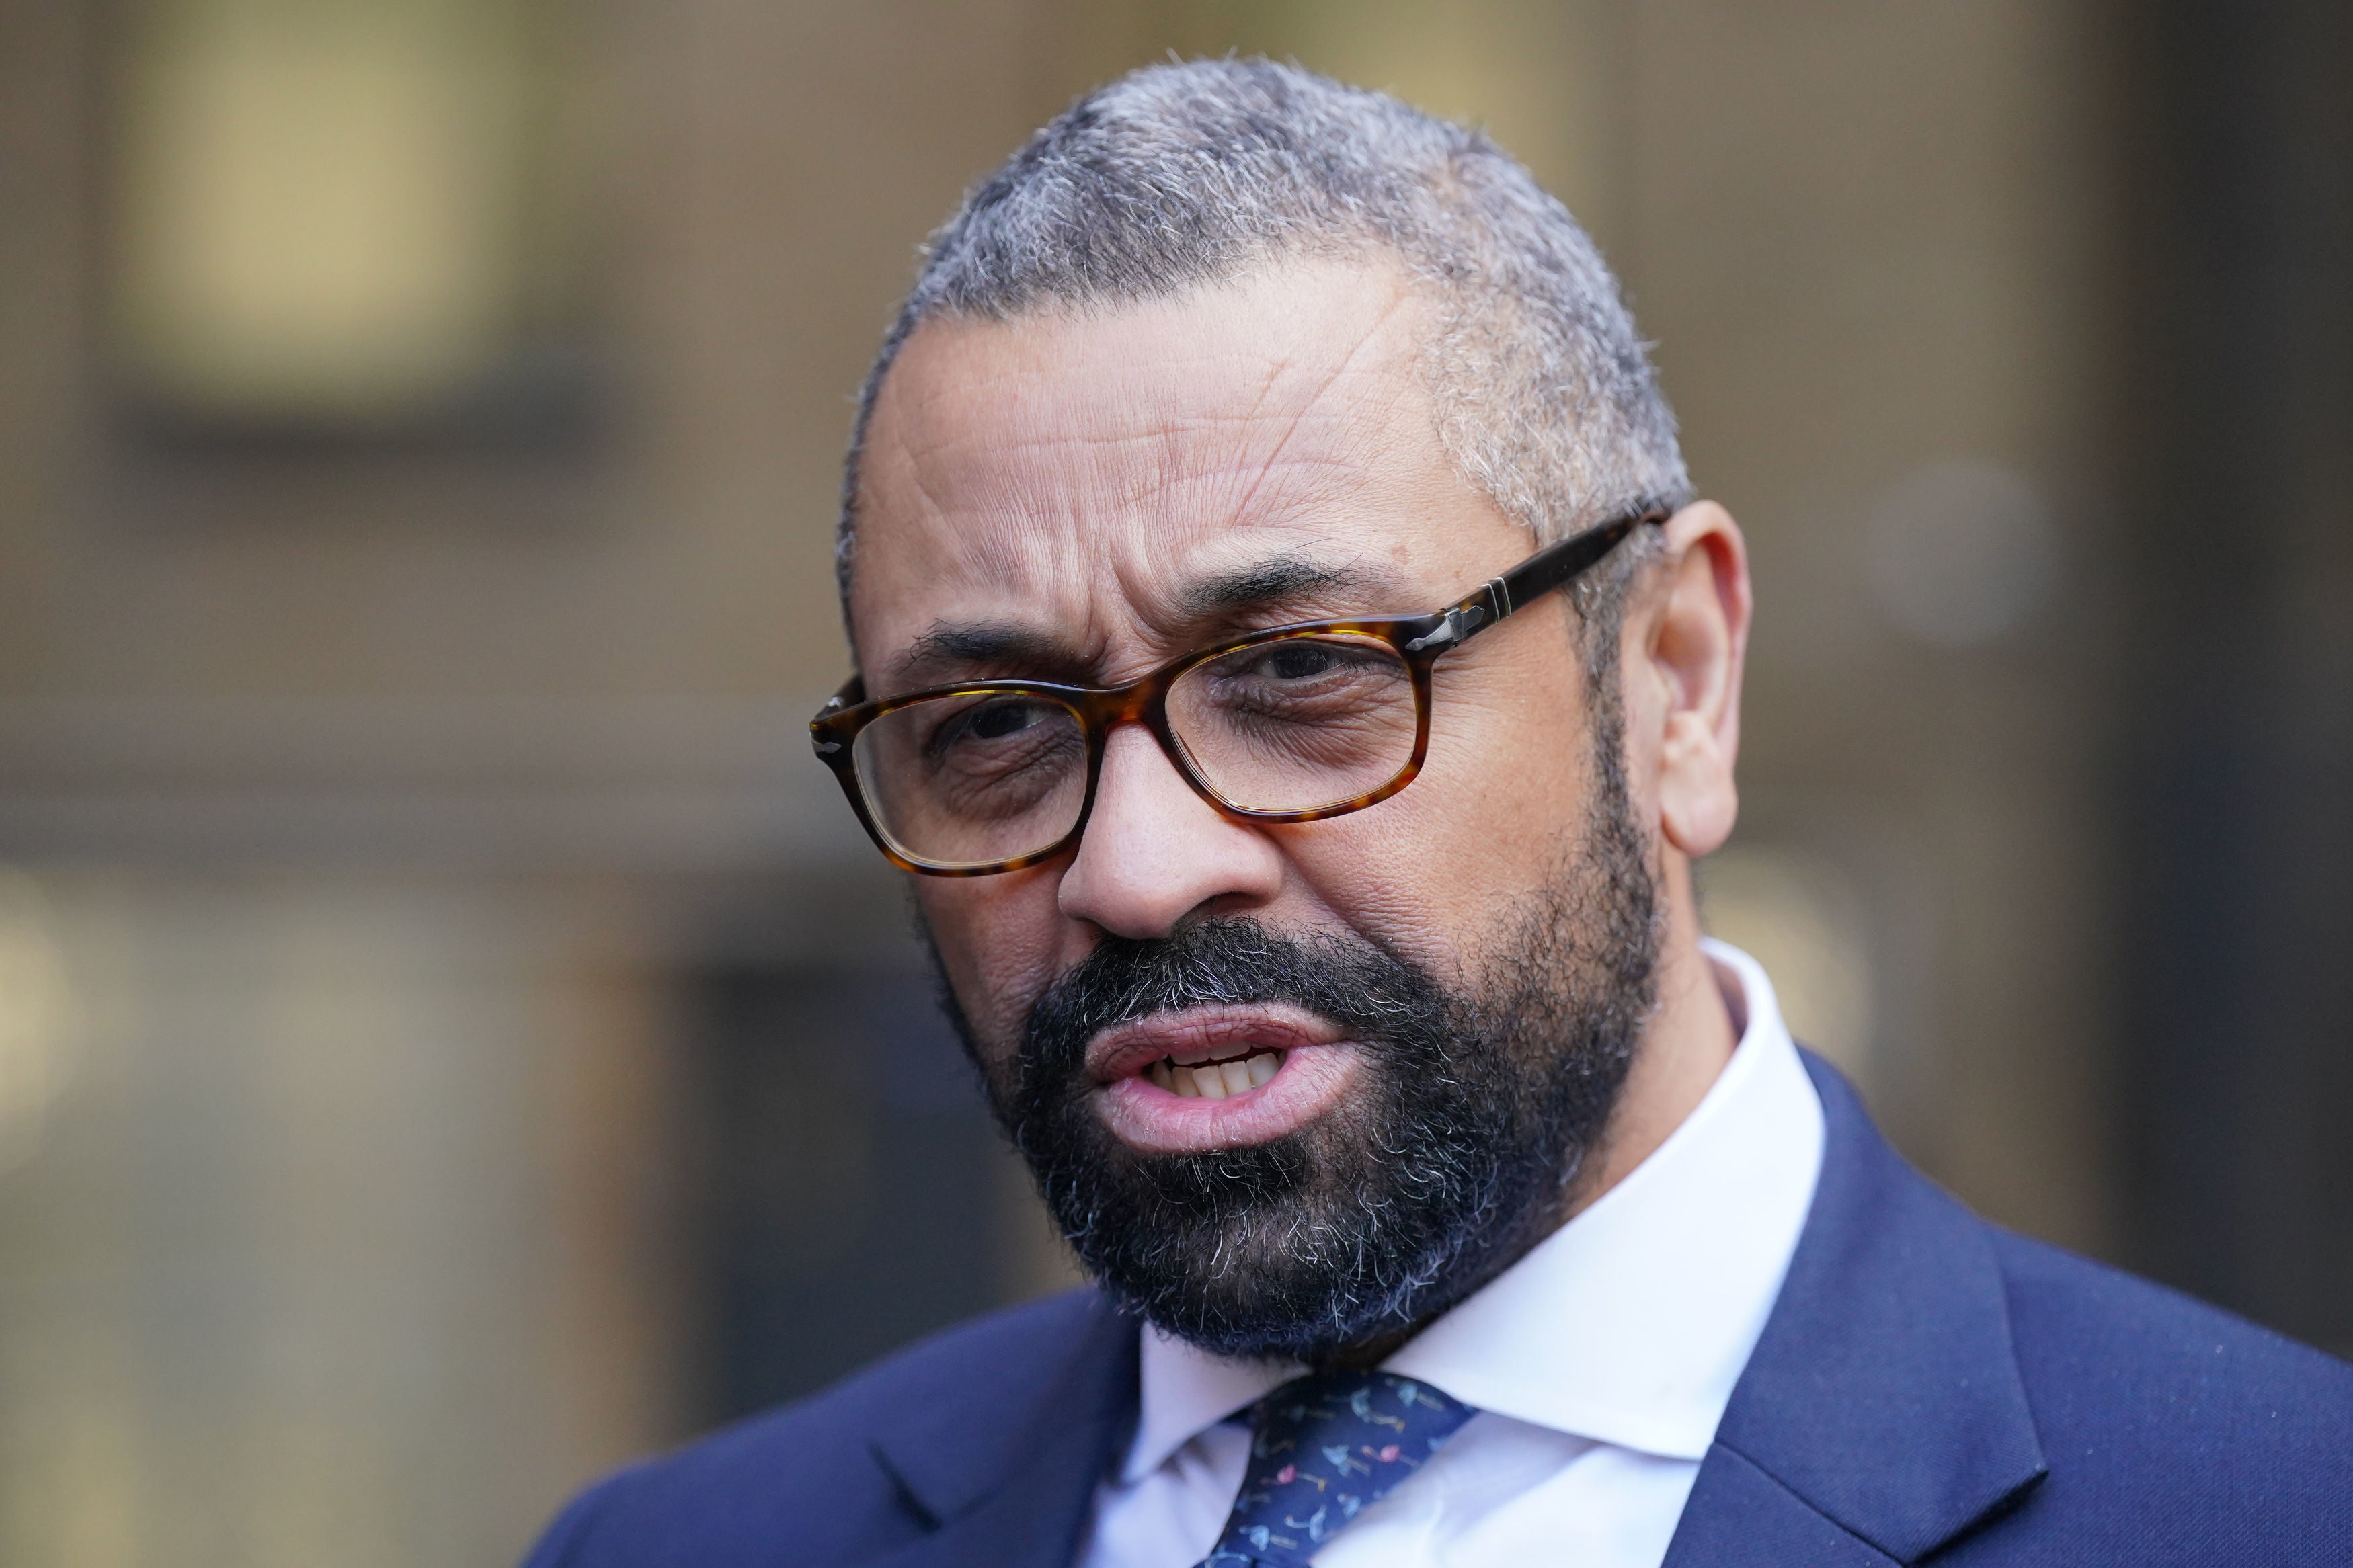 Home secretary James Cleverly has sacked the independent immigration inspector